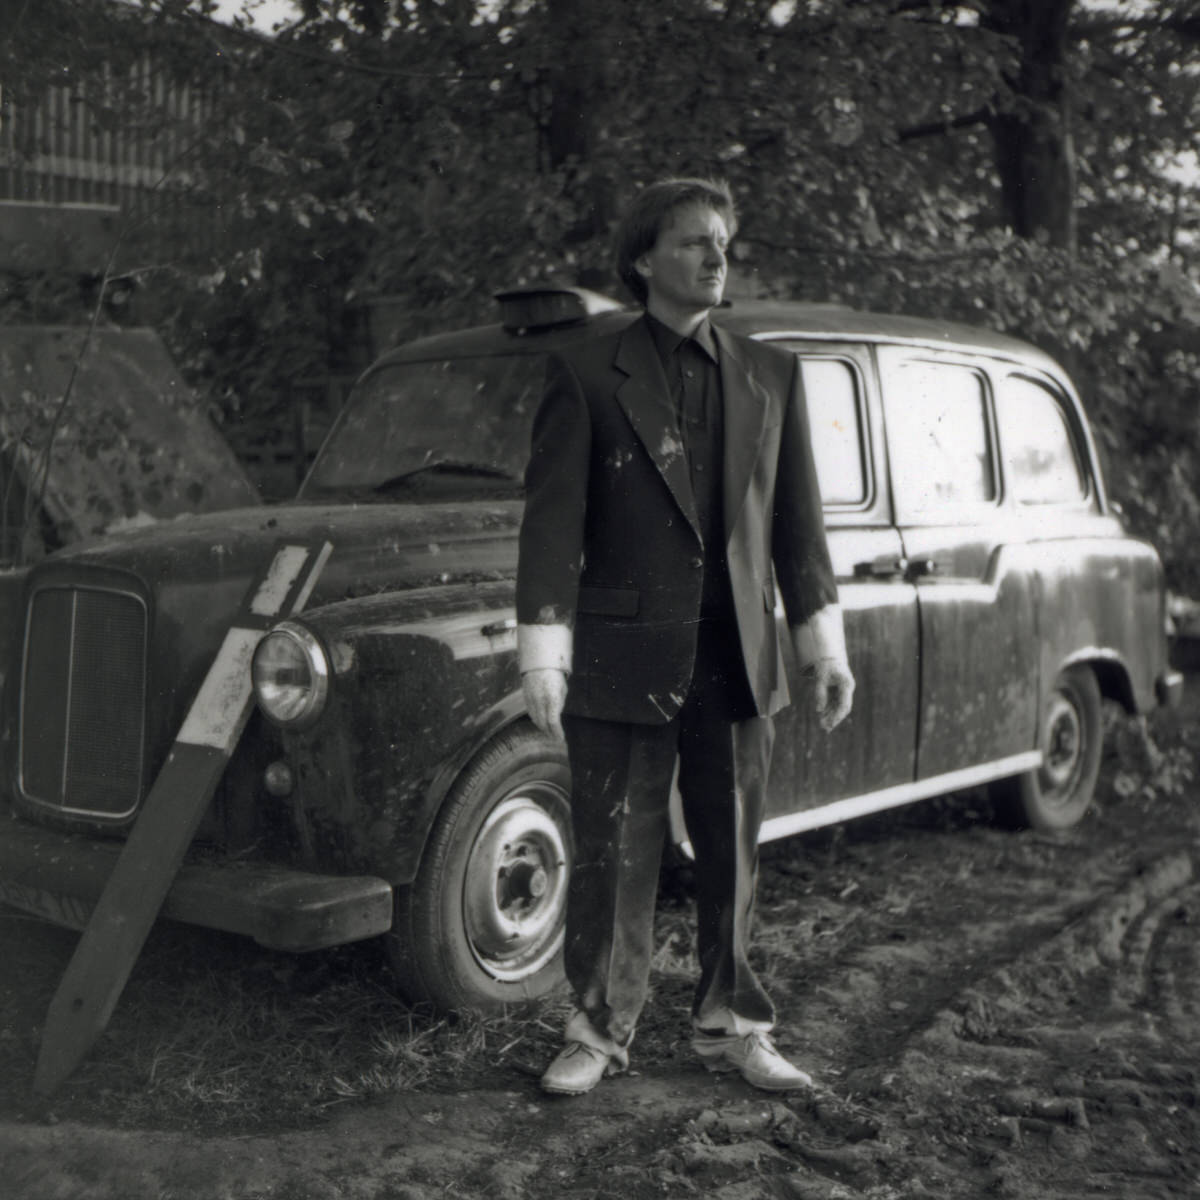 Mark Reed contemporary metal sculptor at studio in England with London Black Cab